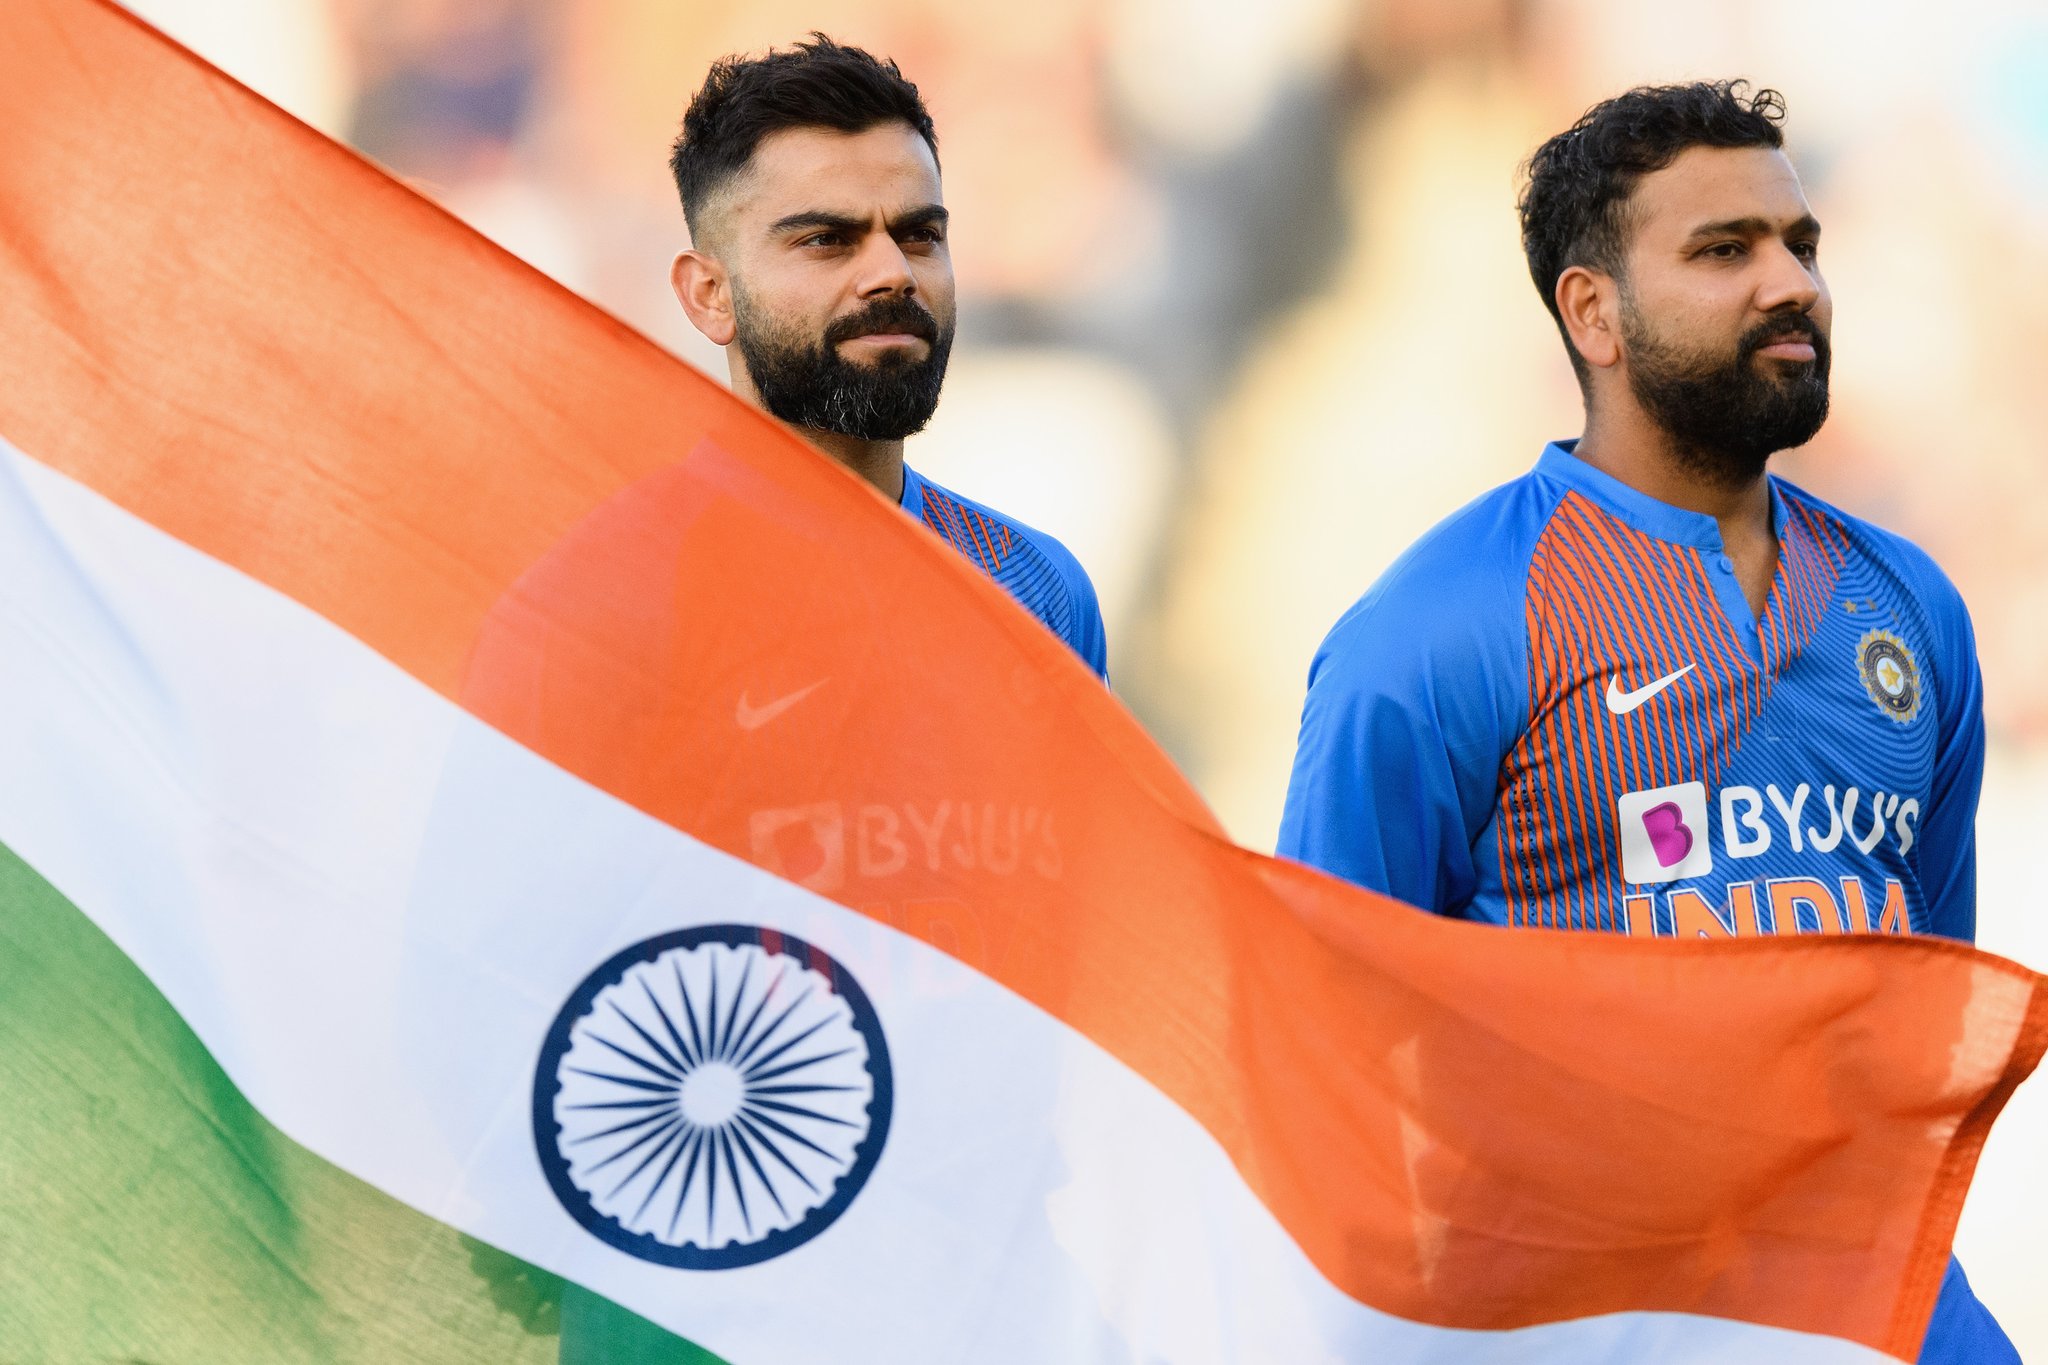 India New ODI Captain: ‘Best decision ever’, reactions pour in as Rohit Sharma replaces Virat Kohli as India’s ODI Captain